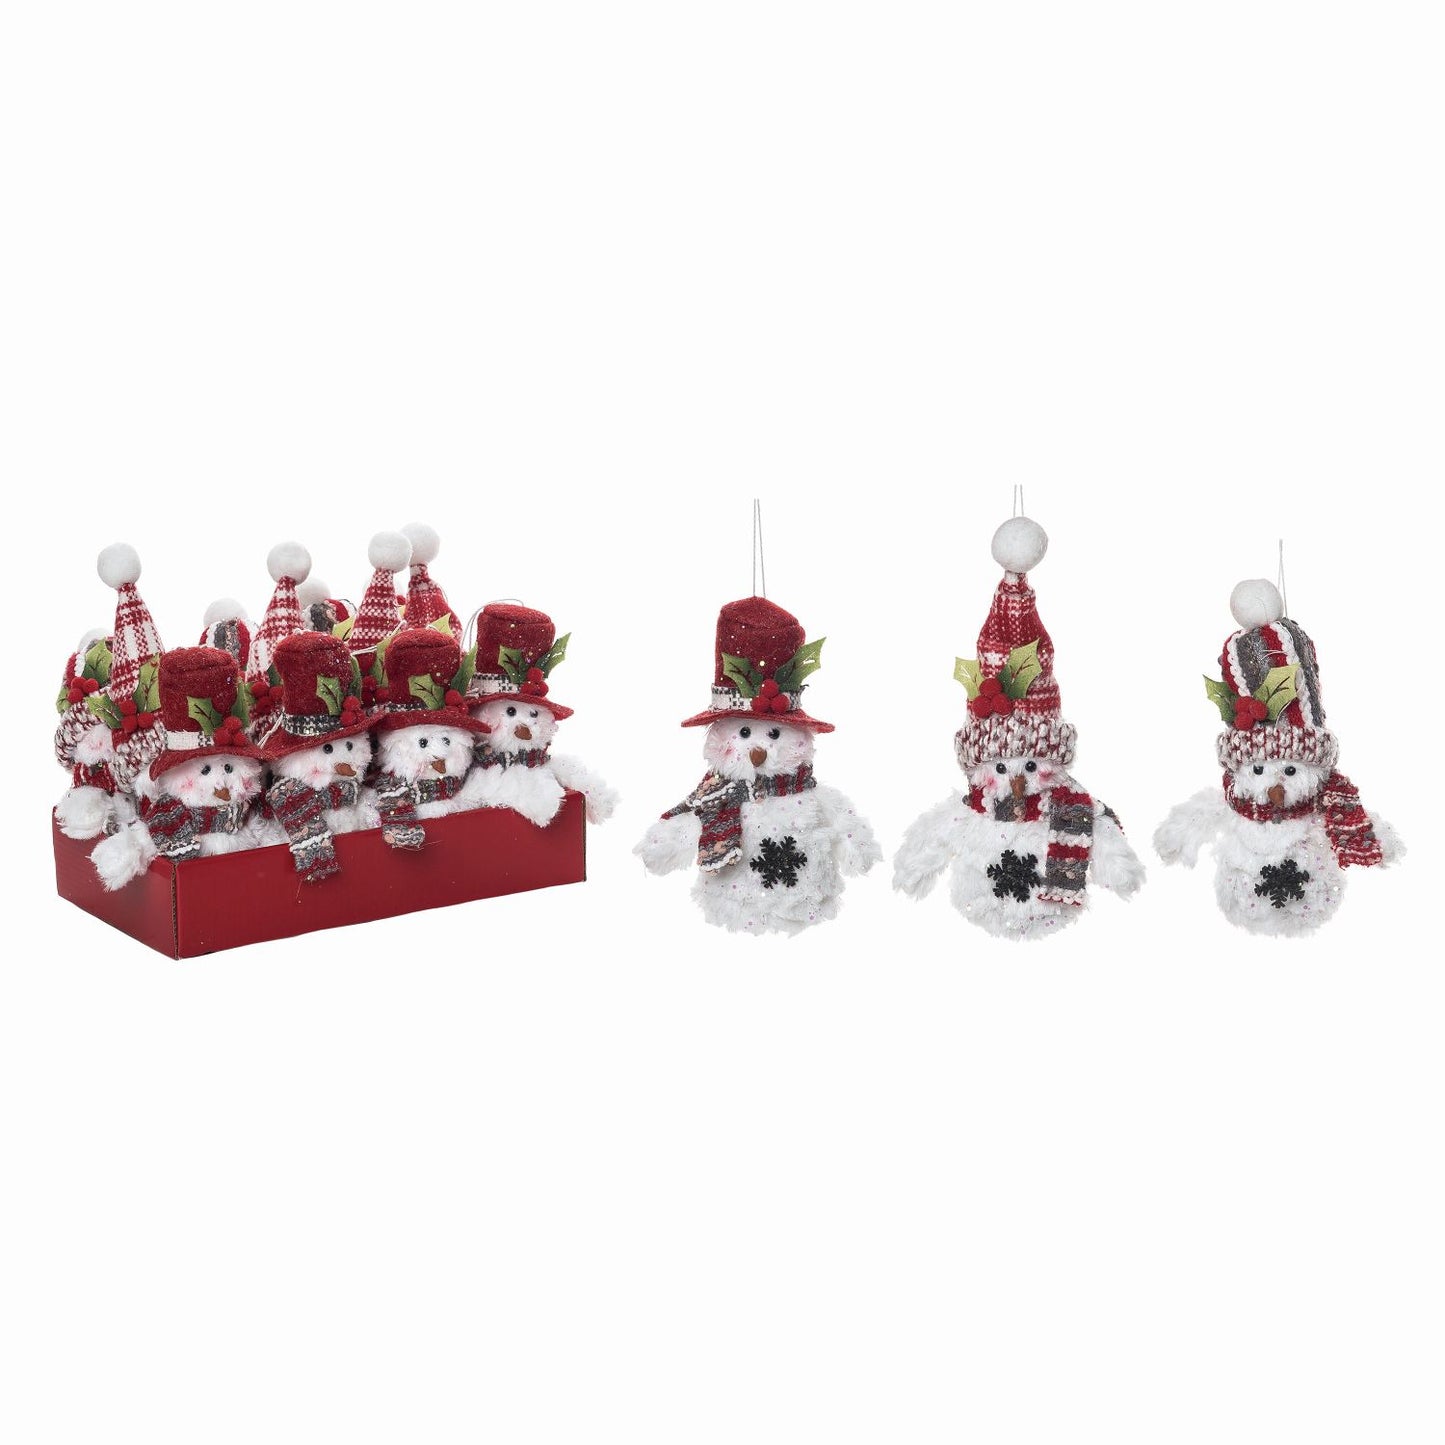 Transpac Plush Stubby Snowman Ornaments In Display, Set Of 12